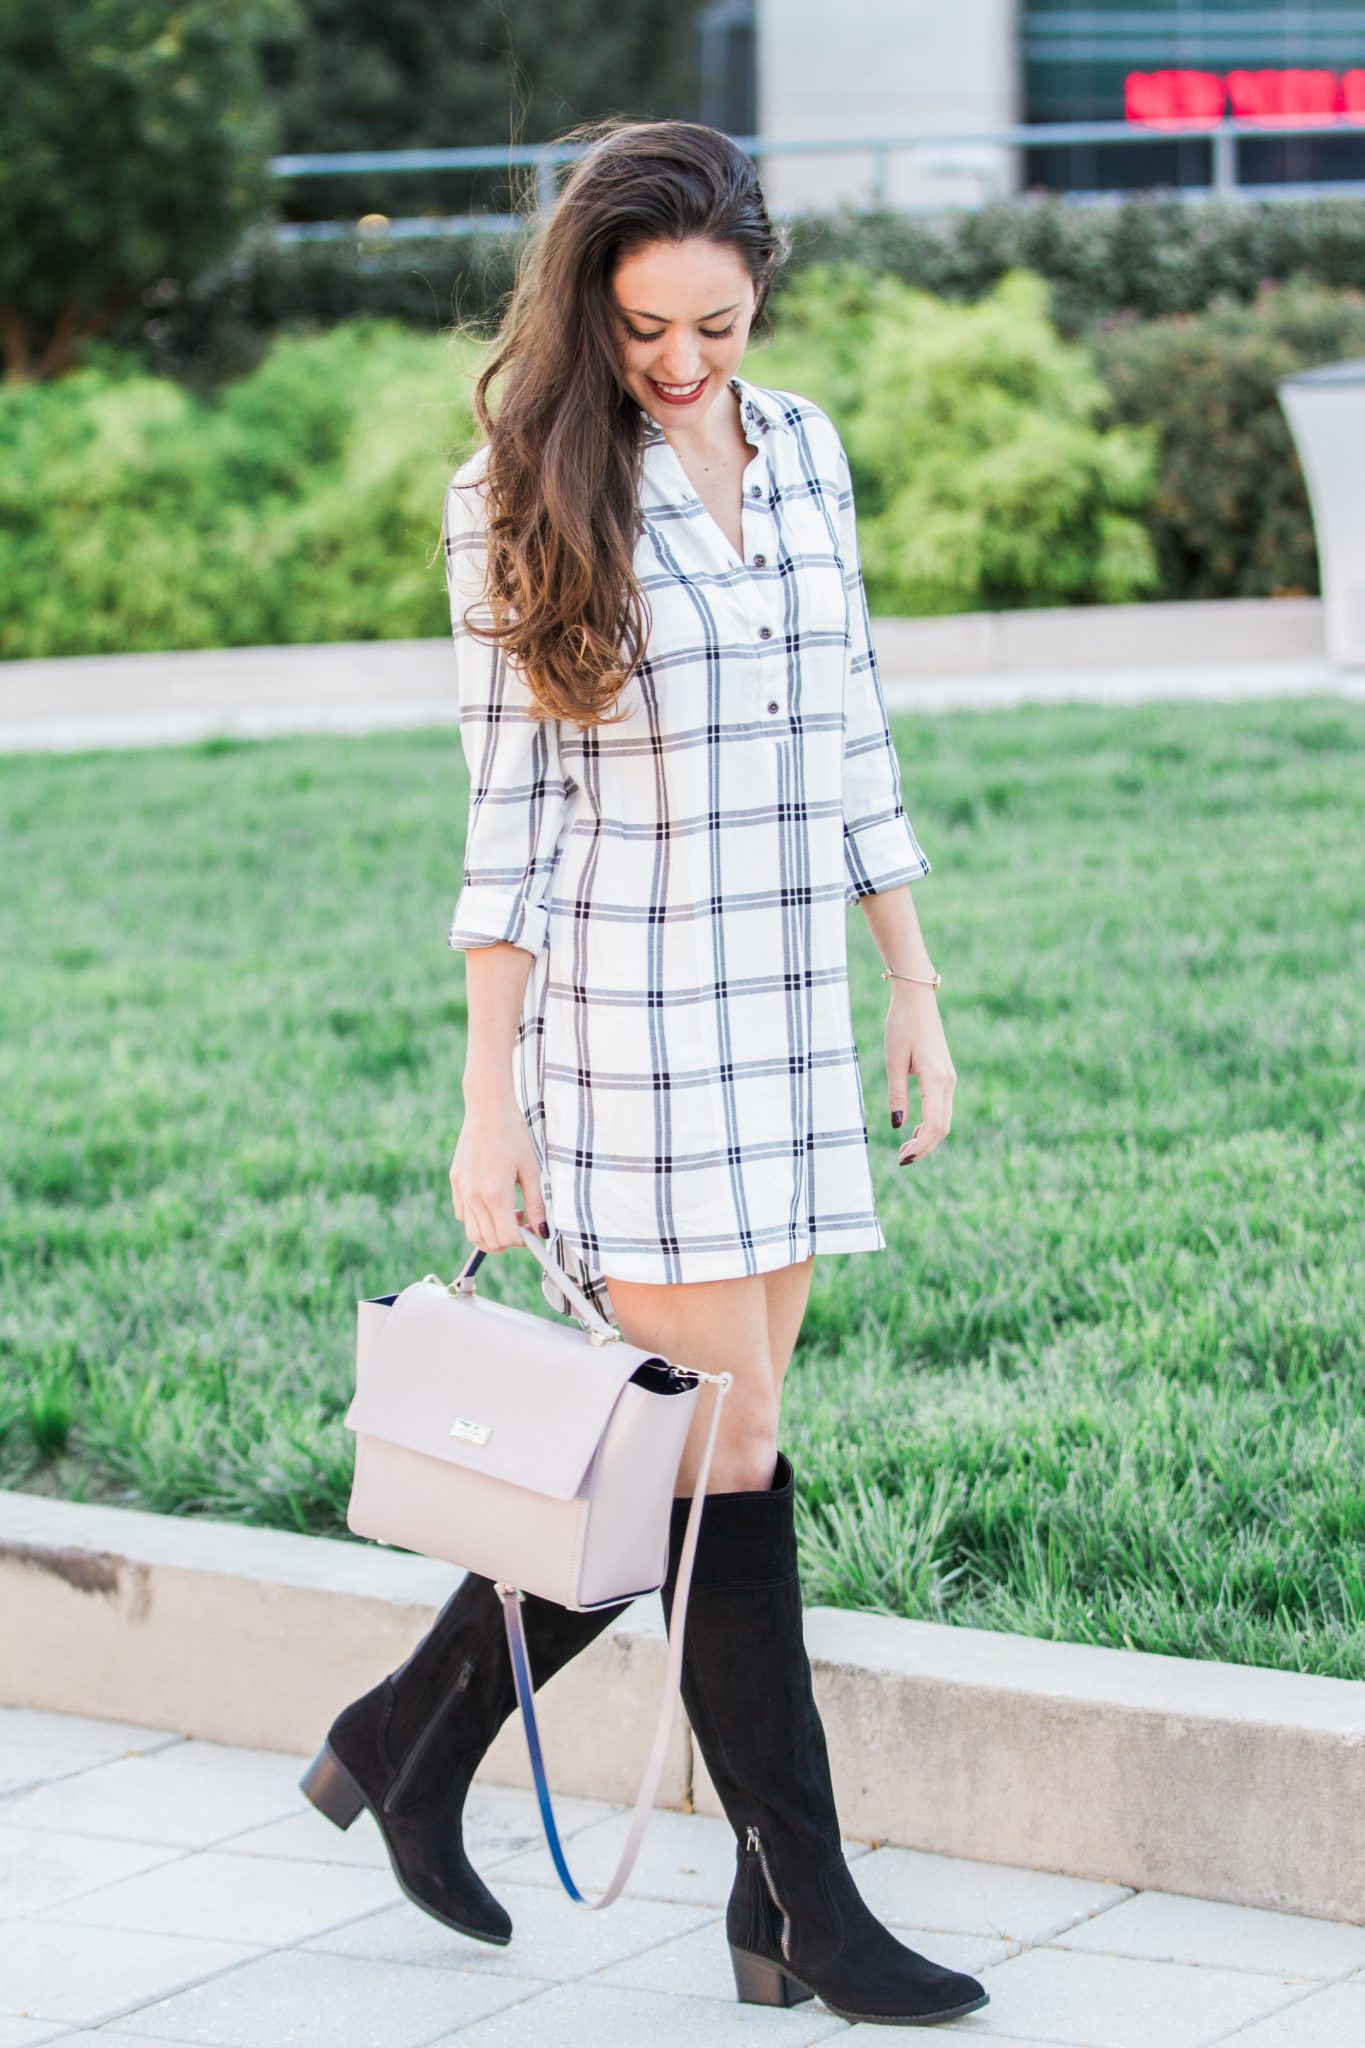 where to shop in atlanta, shopping in atlanta, indigo rd alluring 2 boots in black, plaid dress, belk, how to wear a dress with boots, otk boots, over the knee boots, kate spade ARBOUR HILL LILAH, fall style, classic fall style, casual fall style, shopping outfit ideas, fall outfit ideas